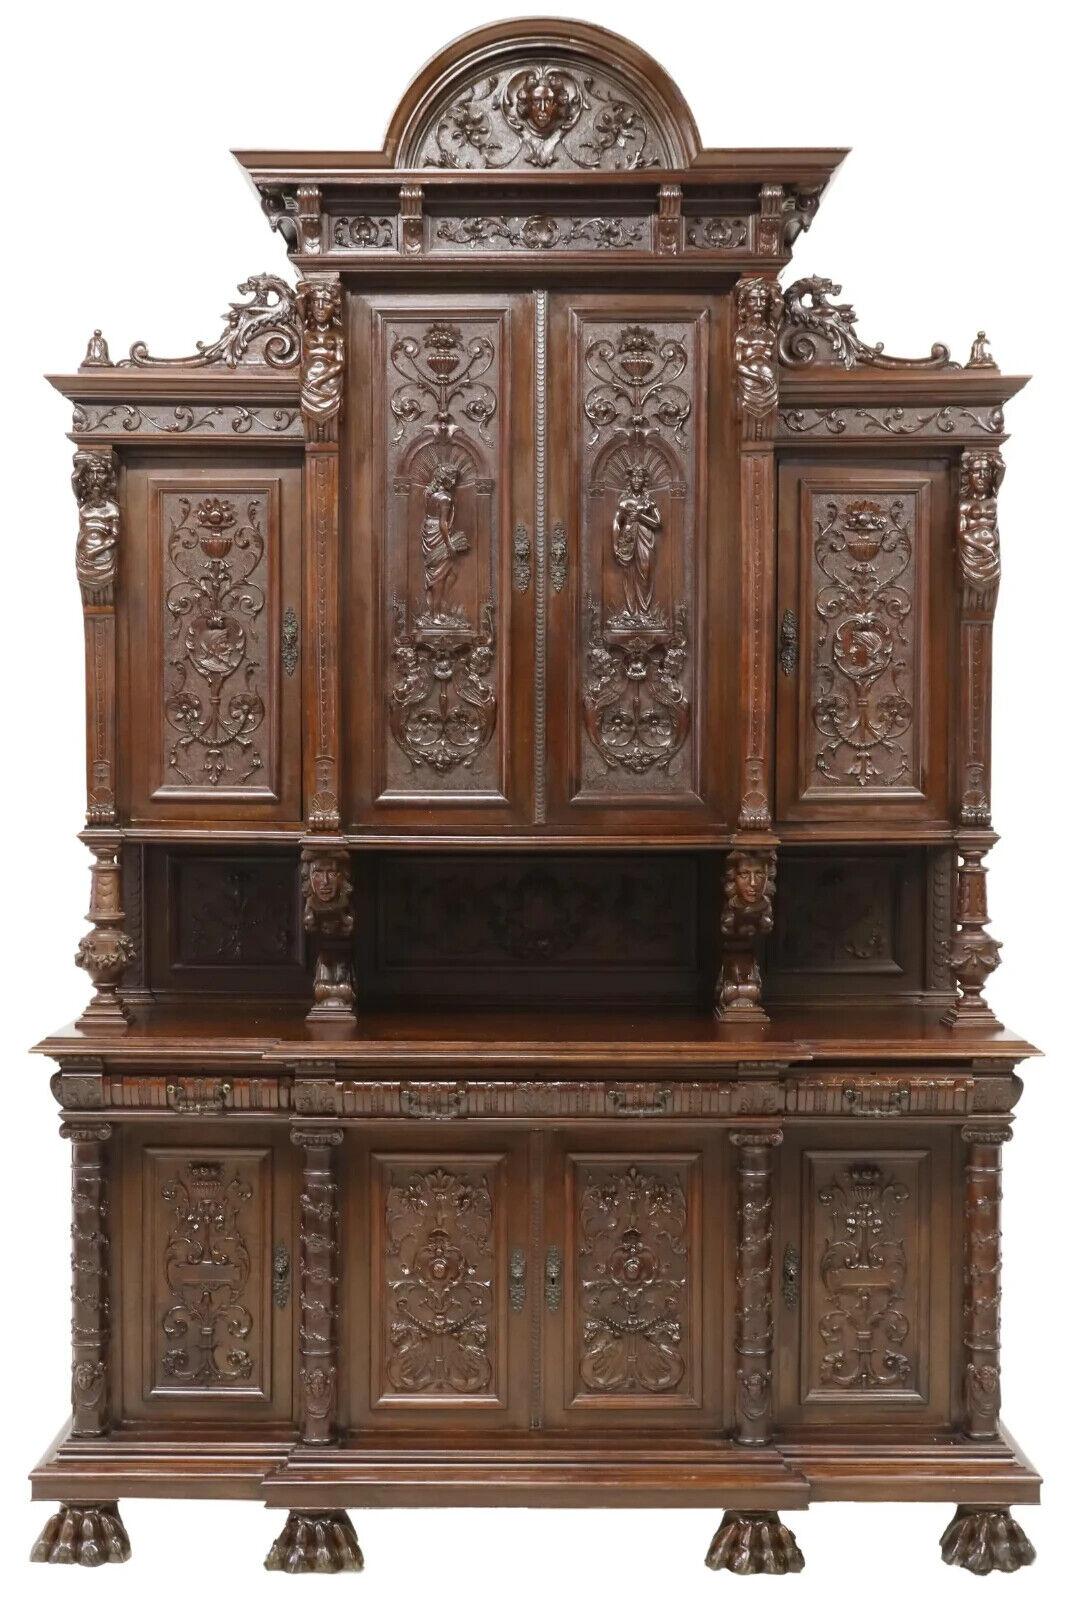 Gorgeous Antique Sideboard, Monumental, Italian Renaissance Revival, Carved, 1800s, 19th Century!! 

Italian Renaissance Revival carved walnut sideboard, late 19th c., rounded pediment with projecting mask, four upper cabinet doors framed by figural